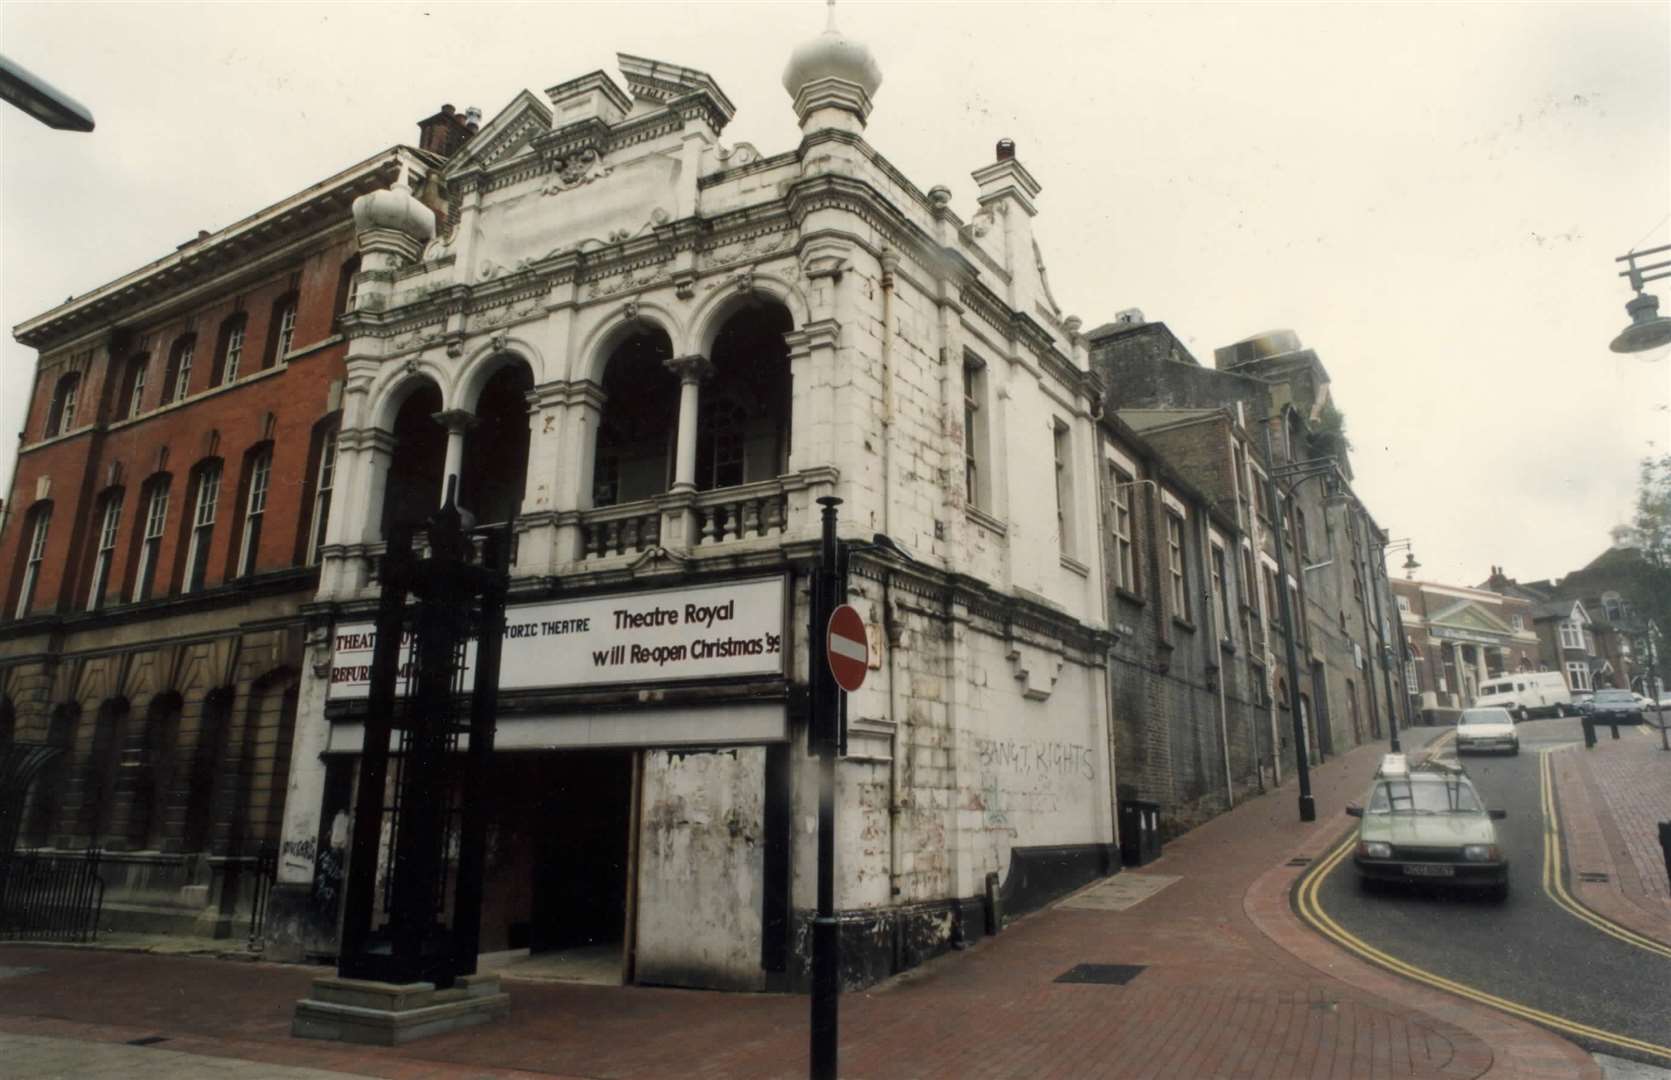 The theatre is shown here in 1995 when it was close to total demolition